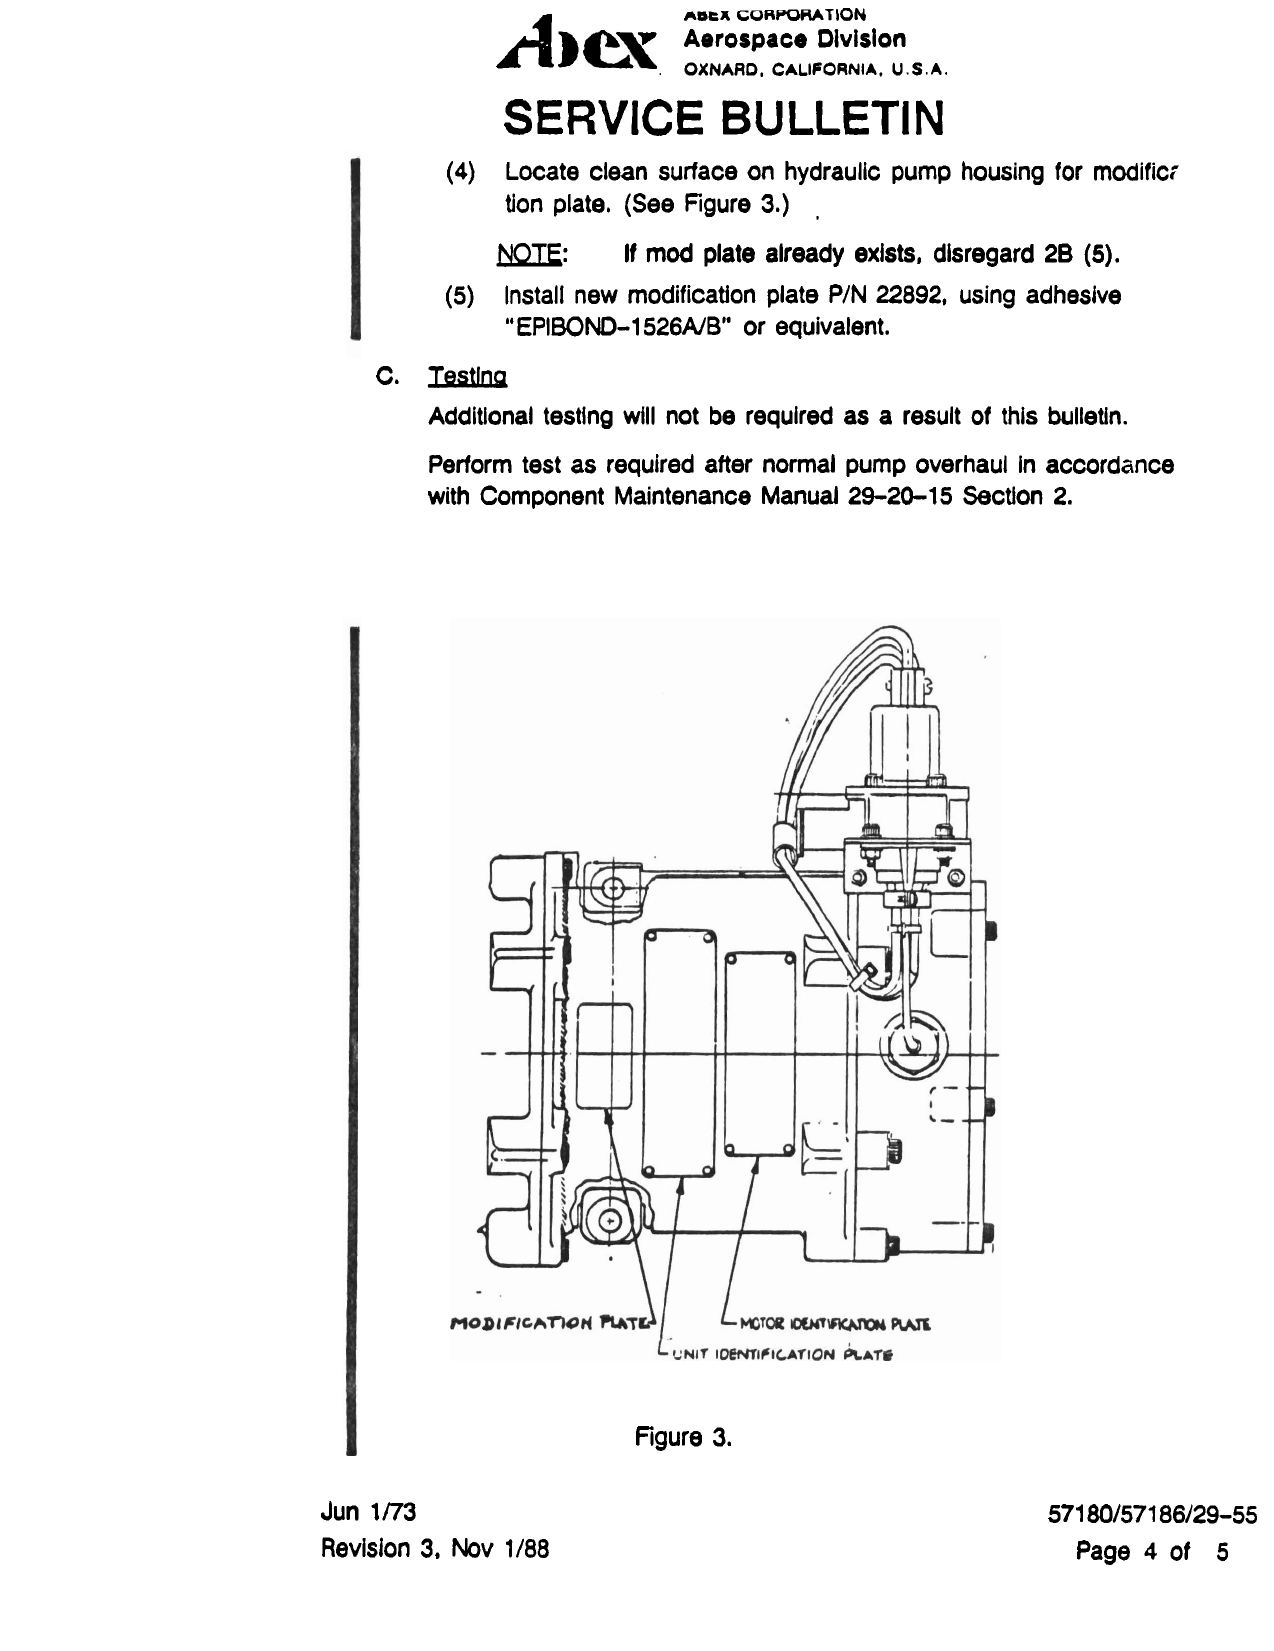 Sample page 5 from AirCorps Library document: Rework Pump Housing for Hydraulic Power Electric Motor Pump